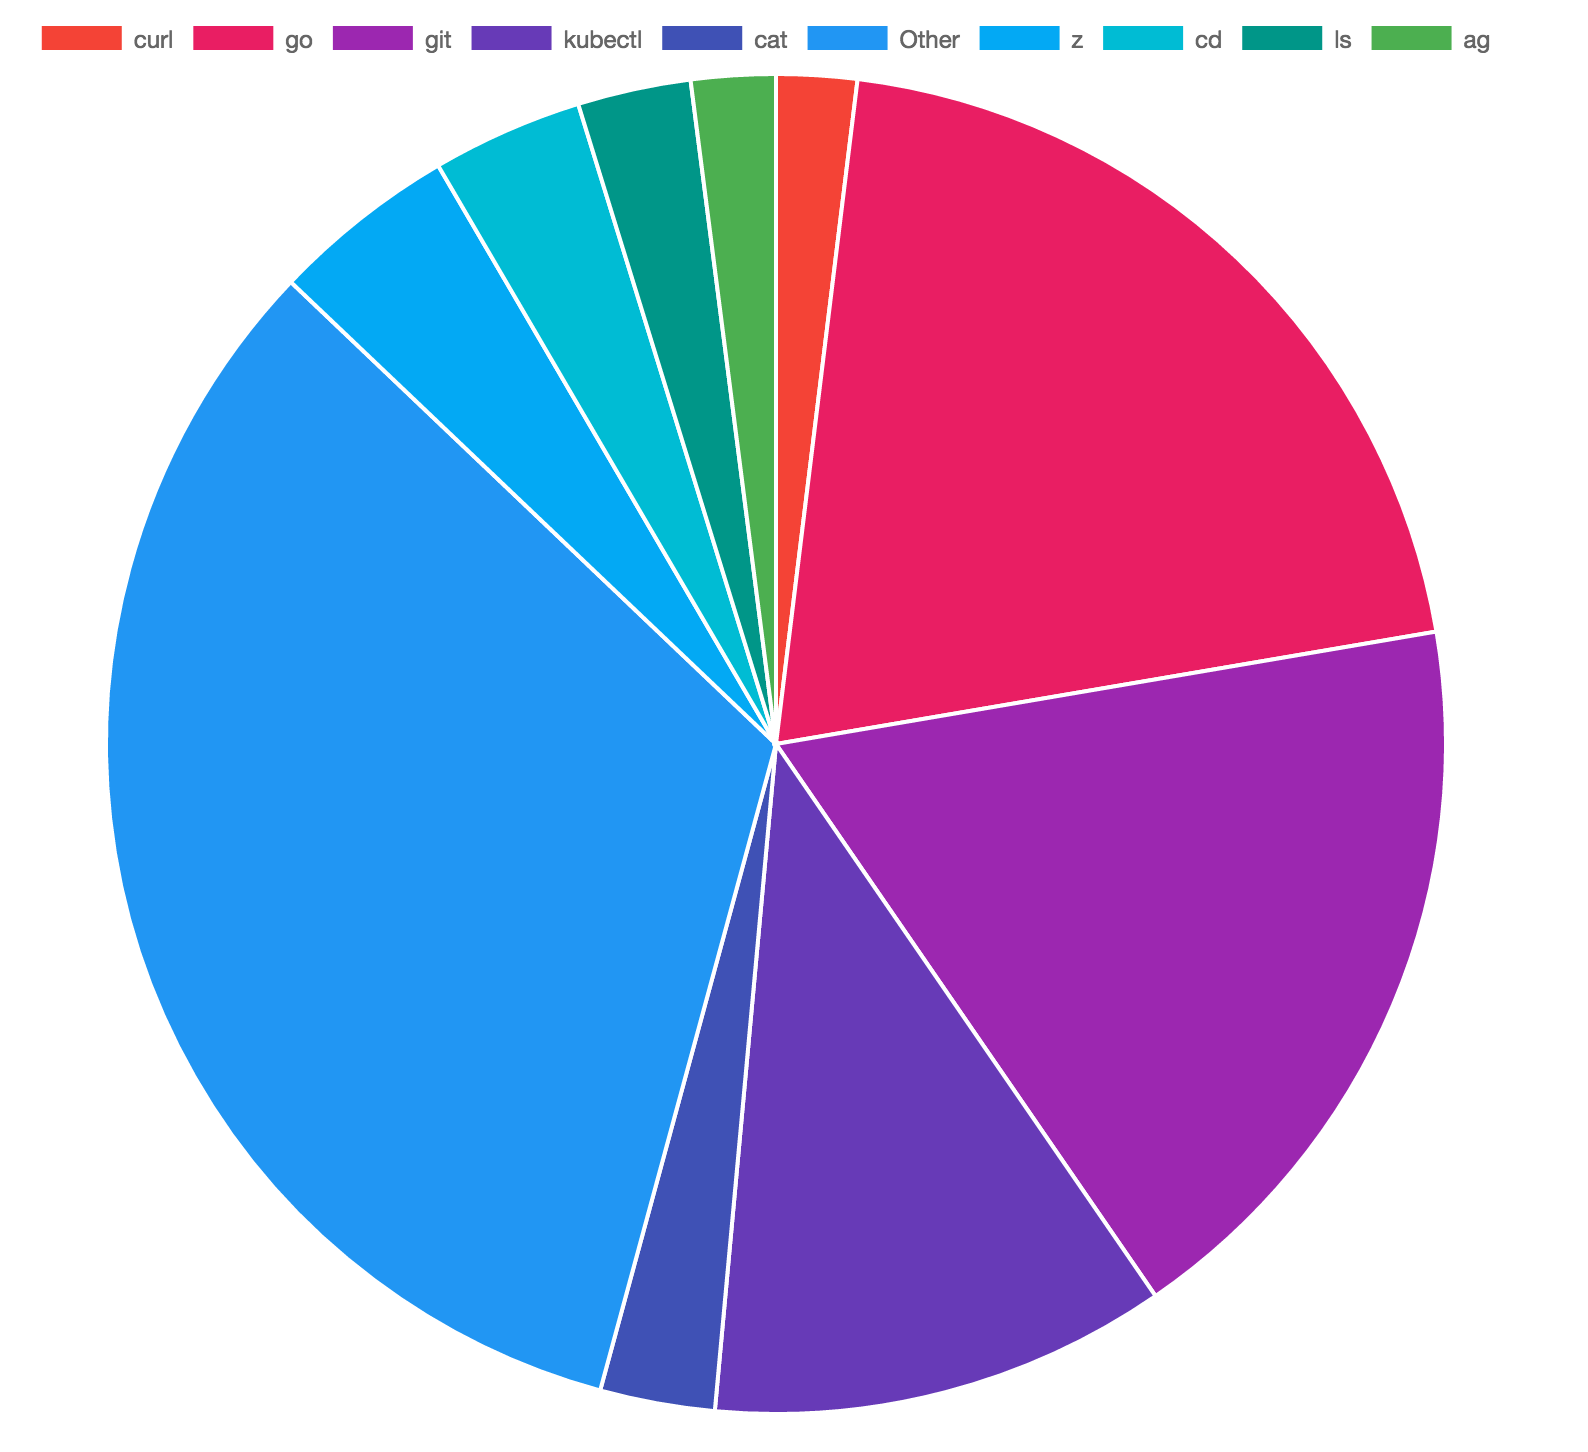 Pie chart of your most used terminal commands